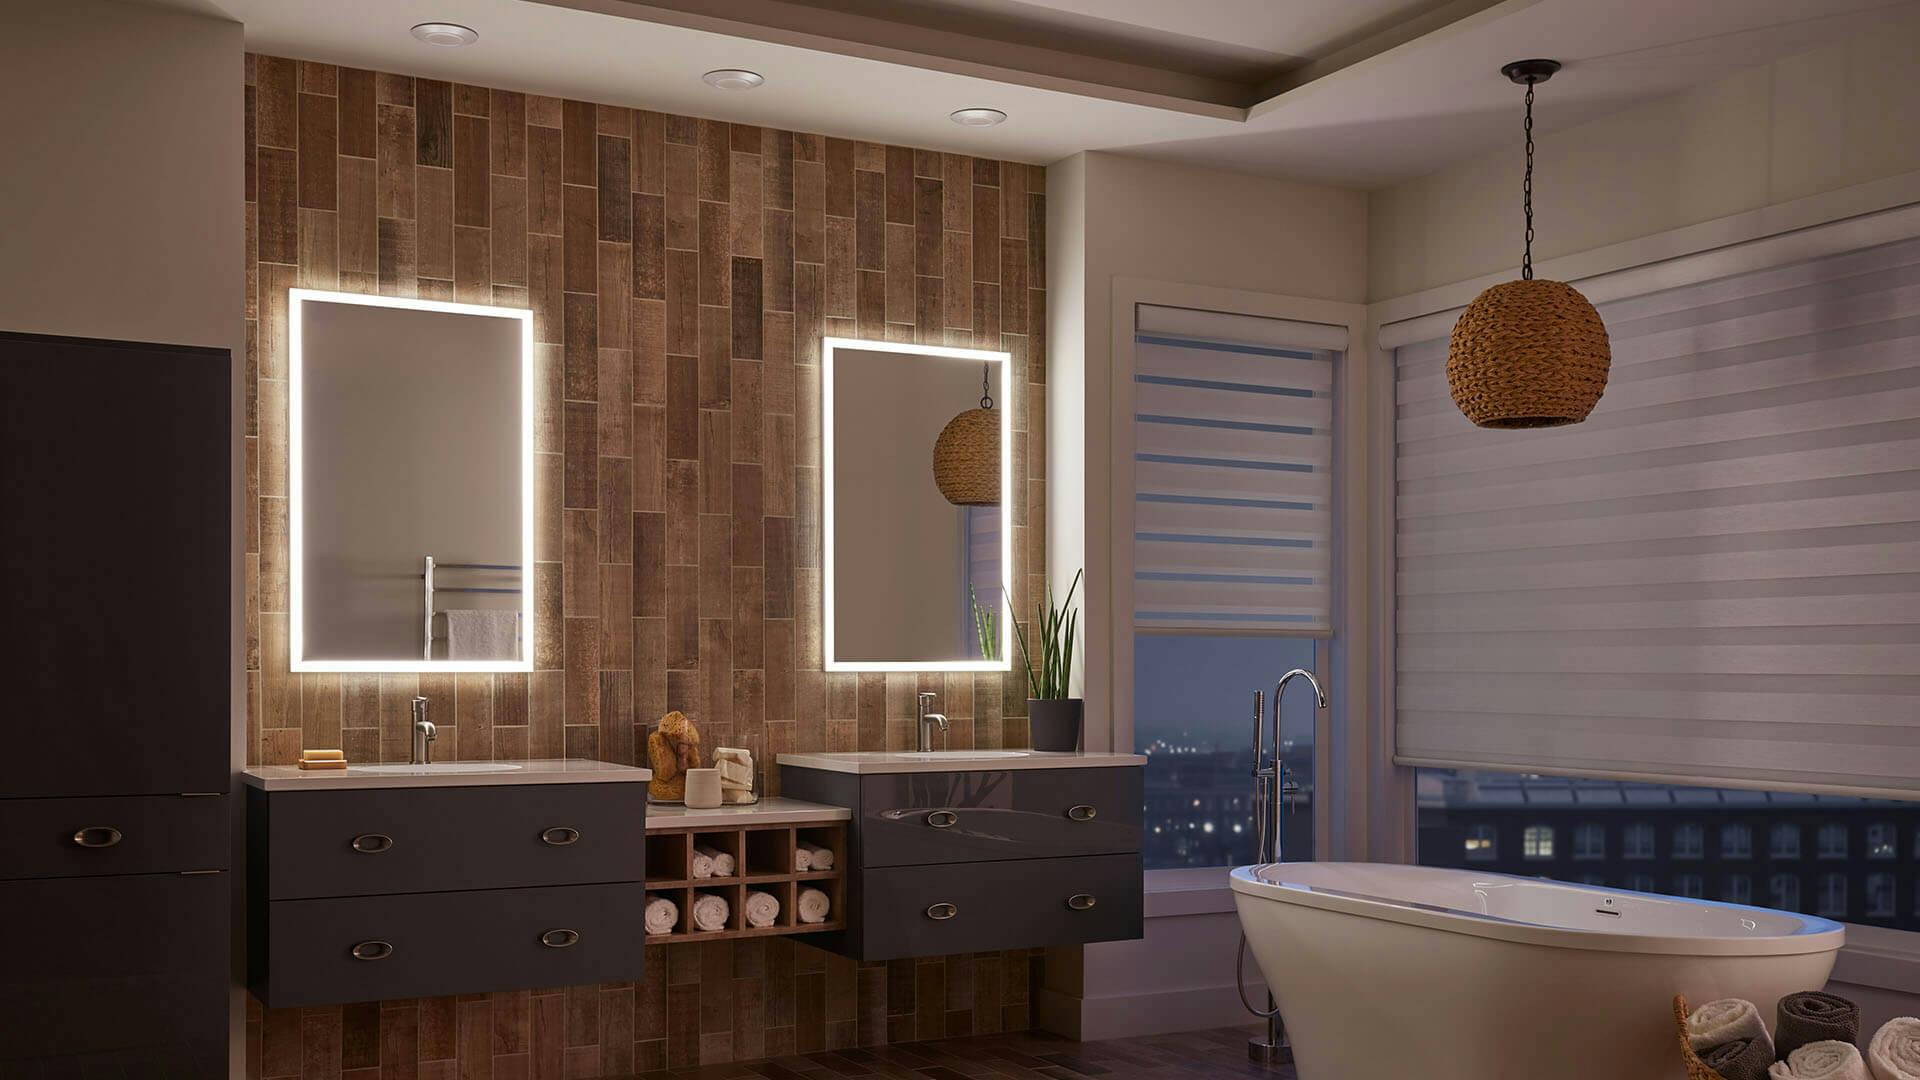 Bathroom lit by two LED backlit mirrors above the sinks